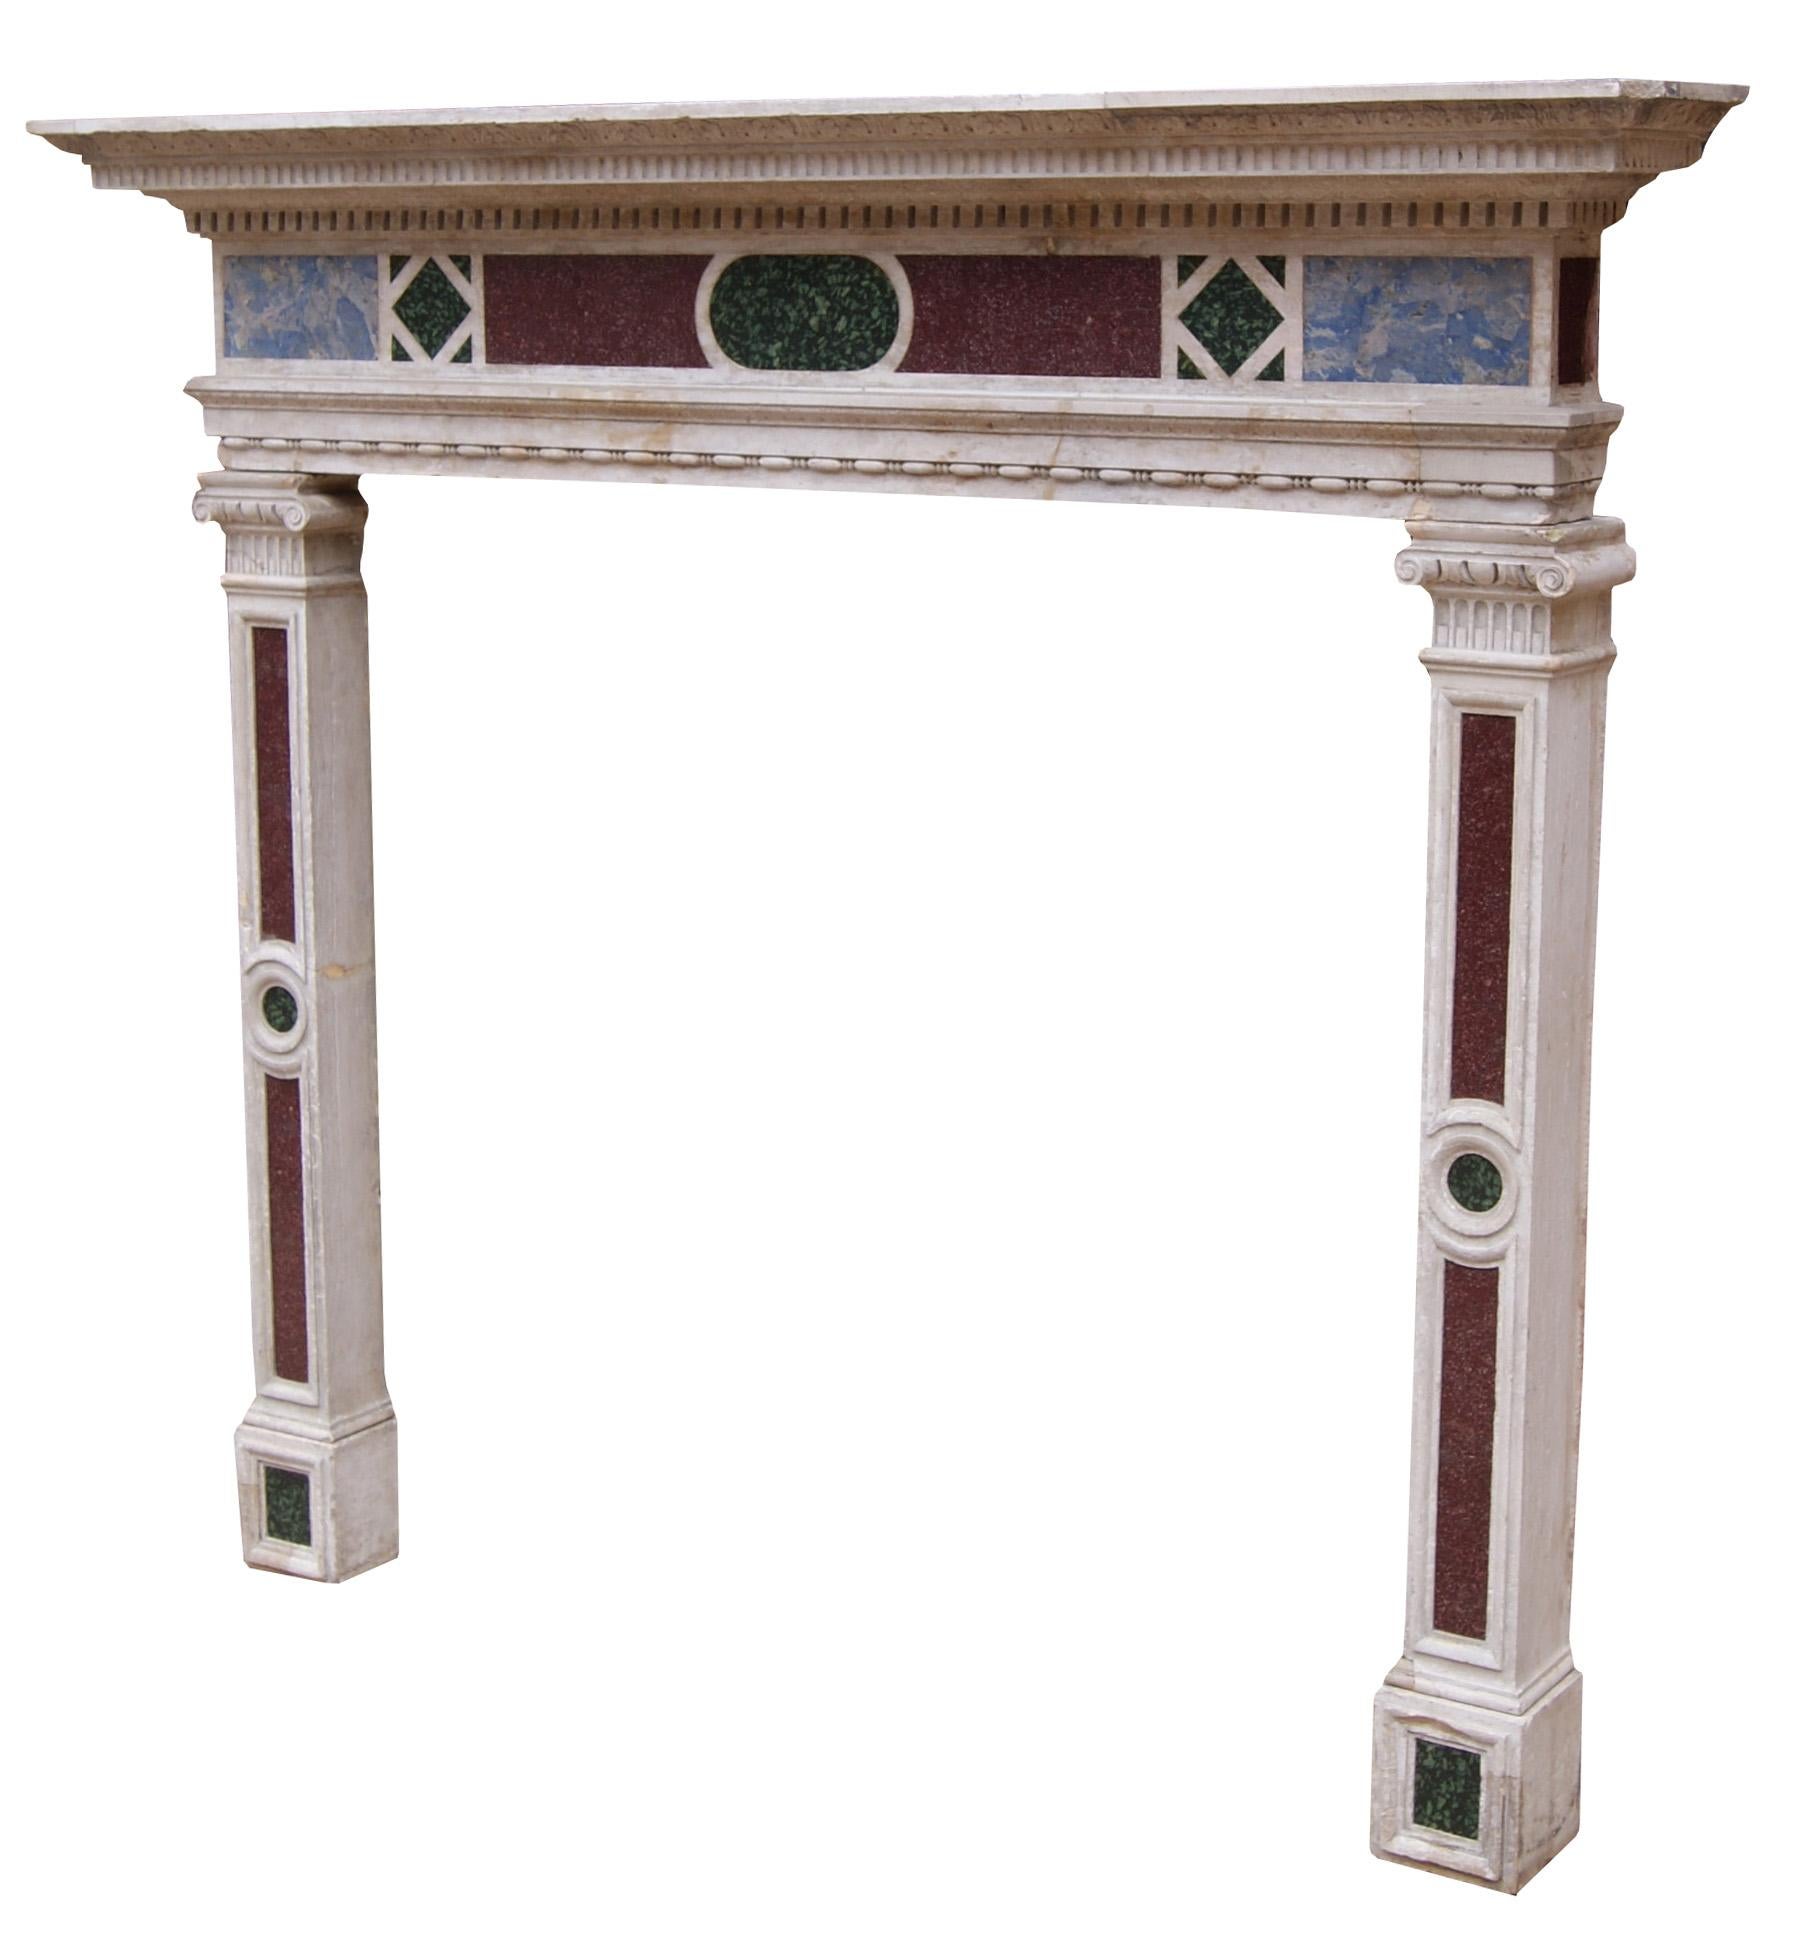 A 19th century Italianate style fireplace carved from Istrian stone with semi-precious inlaid marbles. The frieze panel inlaid with Egyptian Imperial red Porphyry, Ancient Green Peloponnesian Porphyry and lazurite, supported on similarly panelled